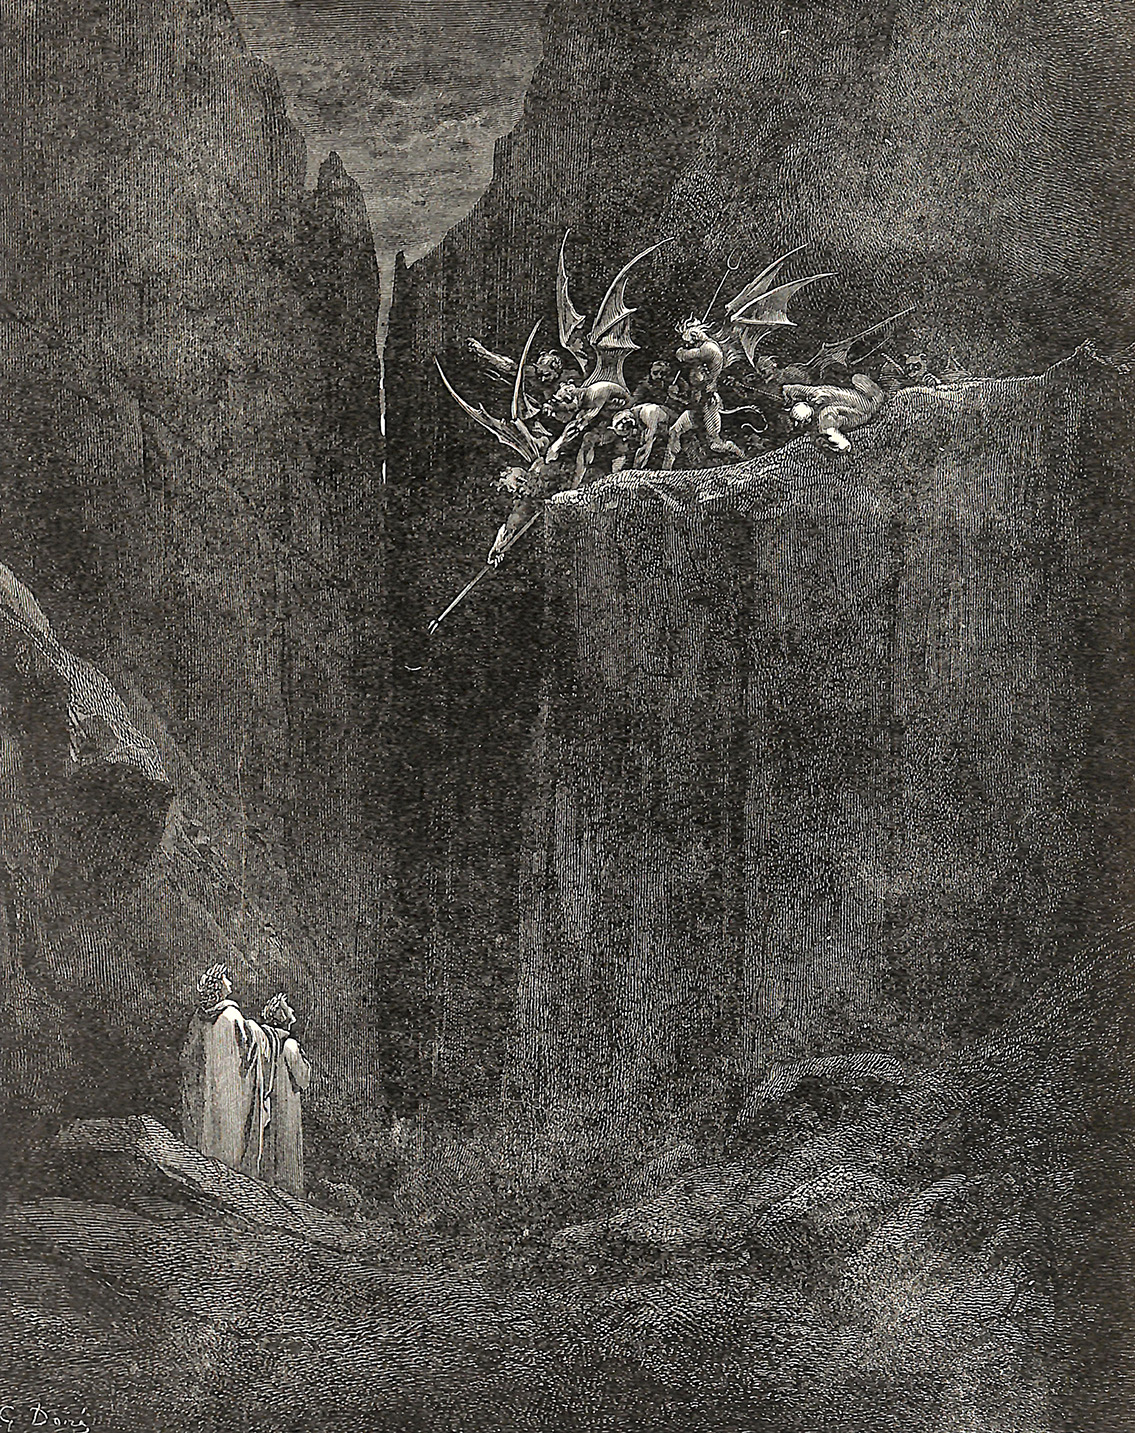 The taunting of Dante